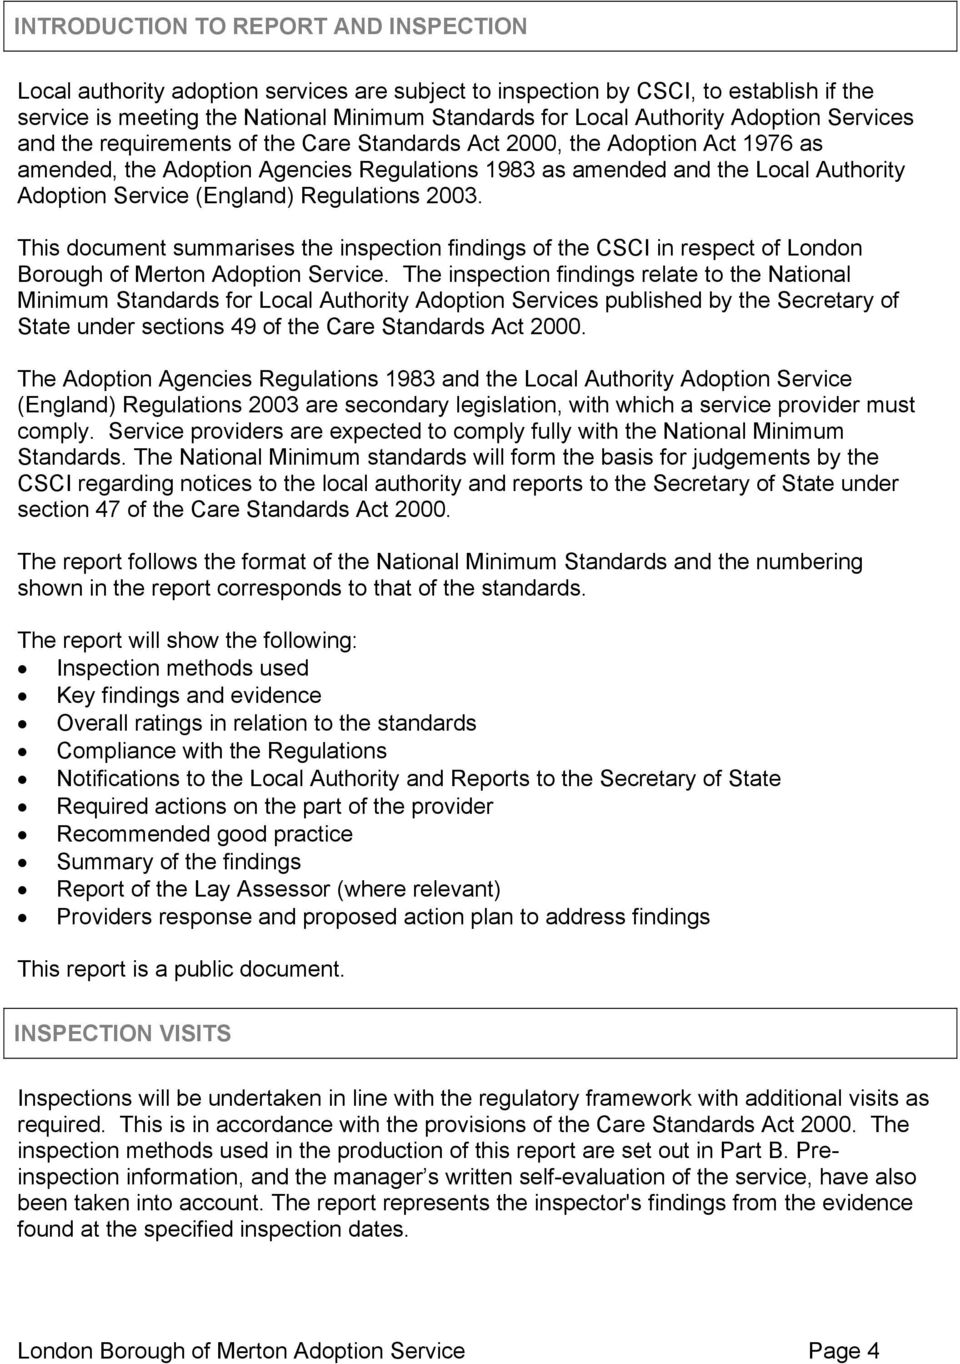 (England) Regulations 2003. This document summarises the inspection findings of the CSCI in respect of London Borough of Merton Adoption Service.